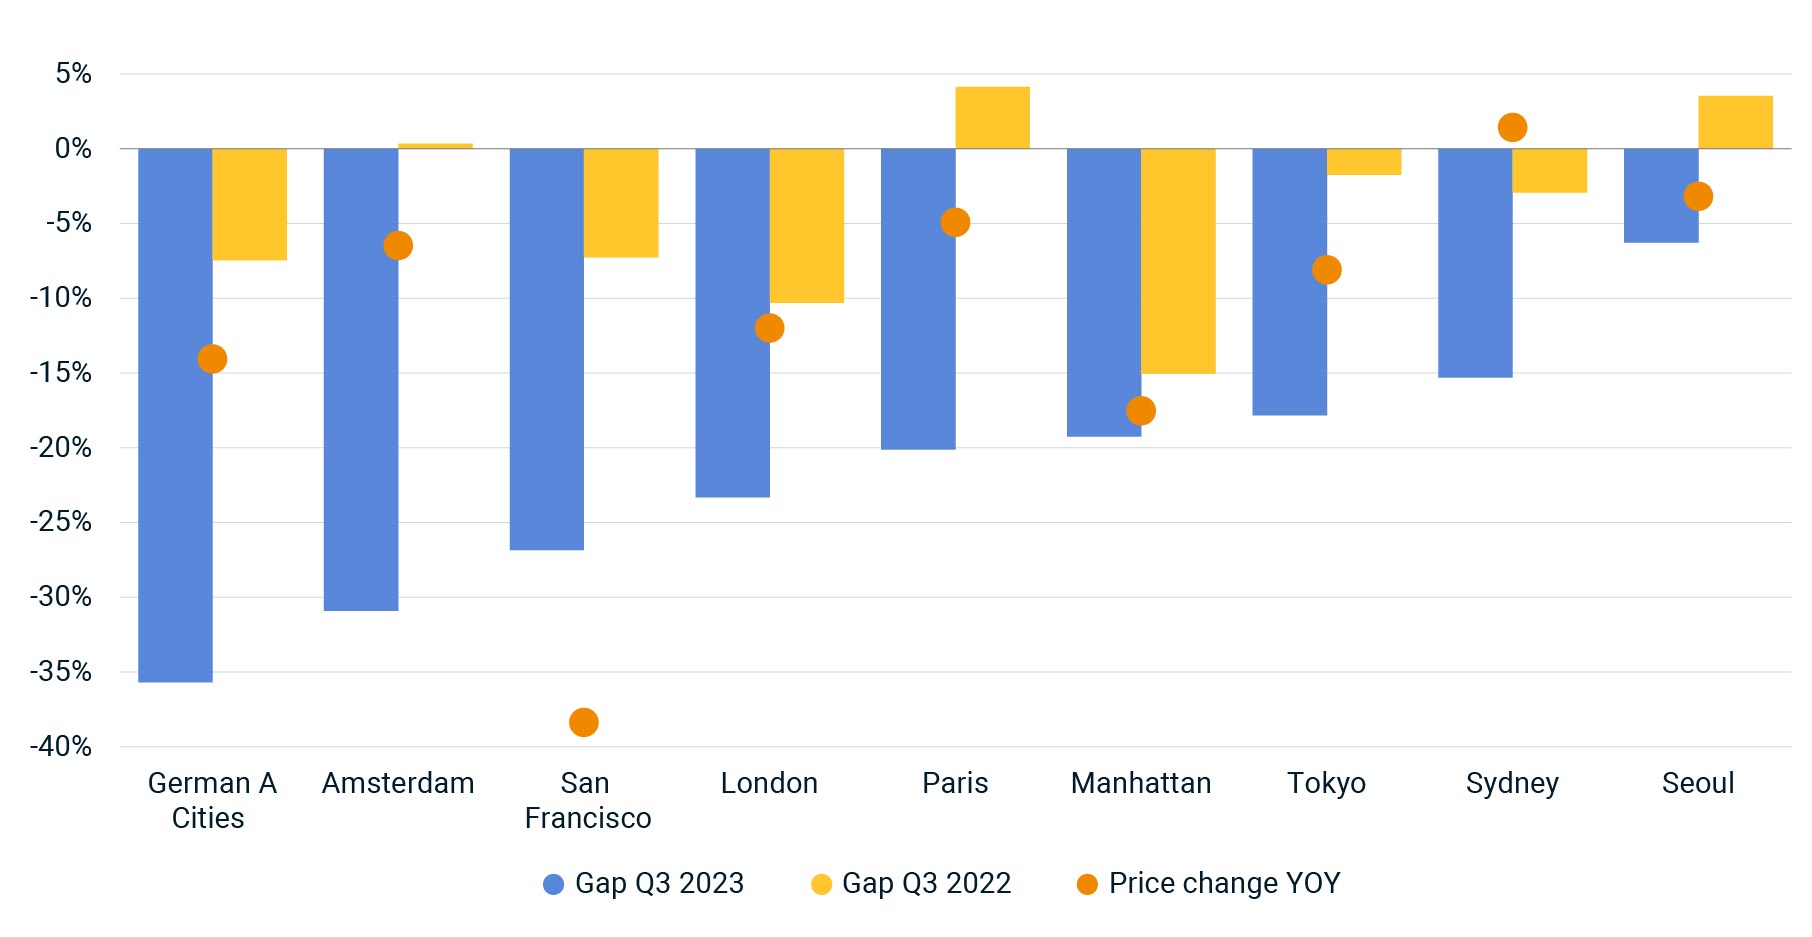 This chart shows the price expectations gap for offices across a selection of global markets, plus the price change over the past year.